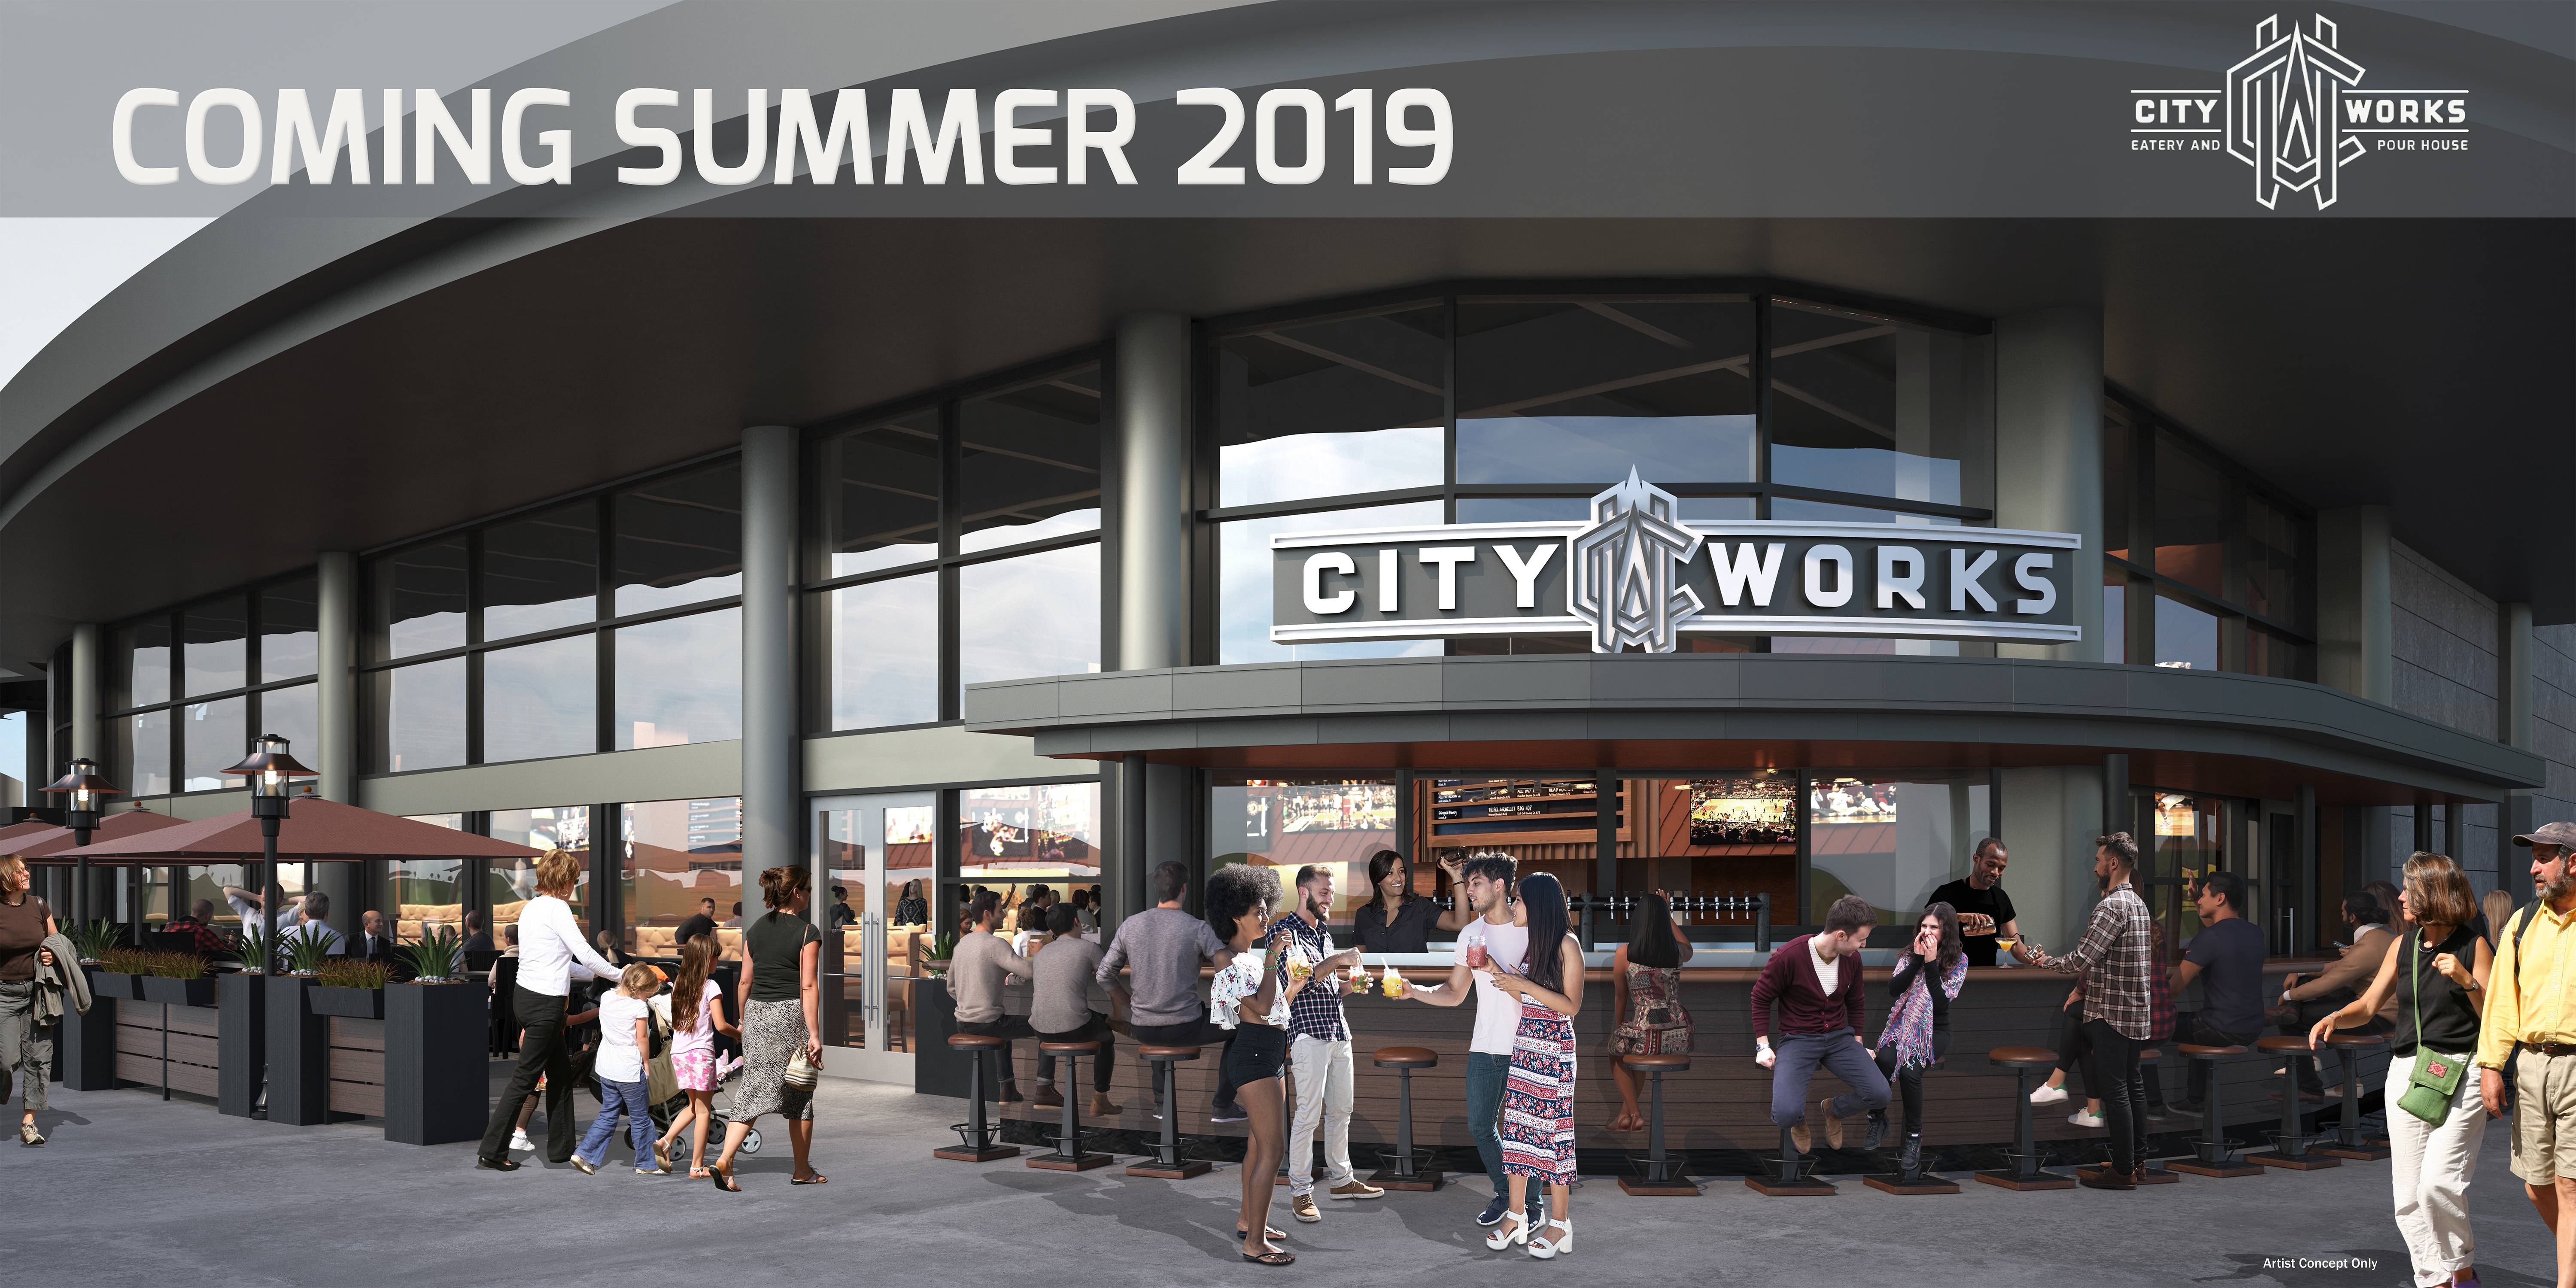 City Works Eatery and Pour House concept art